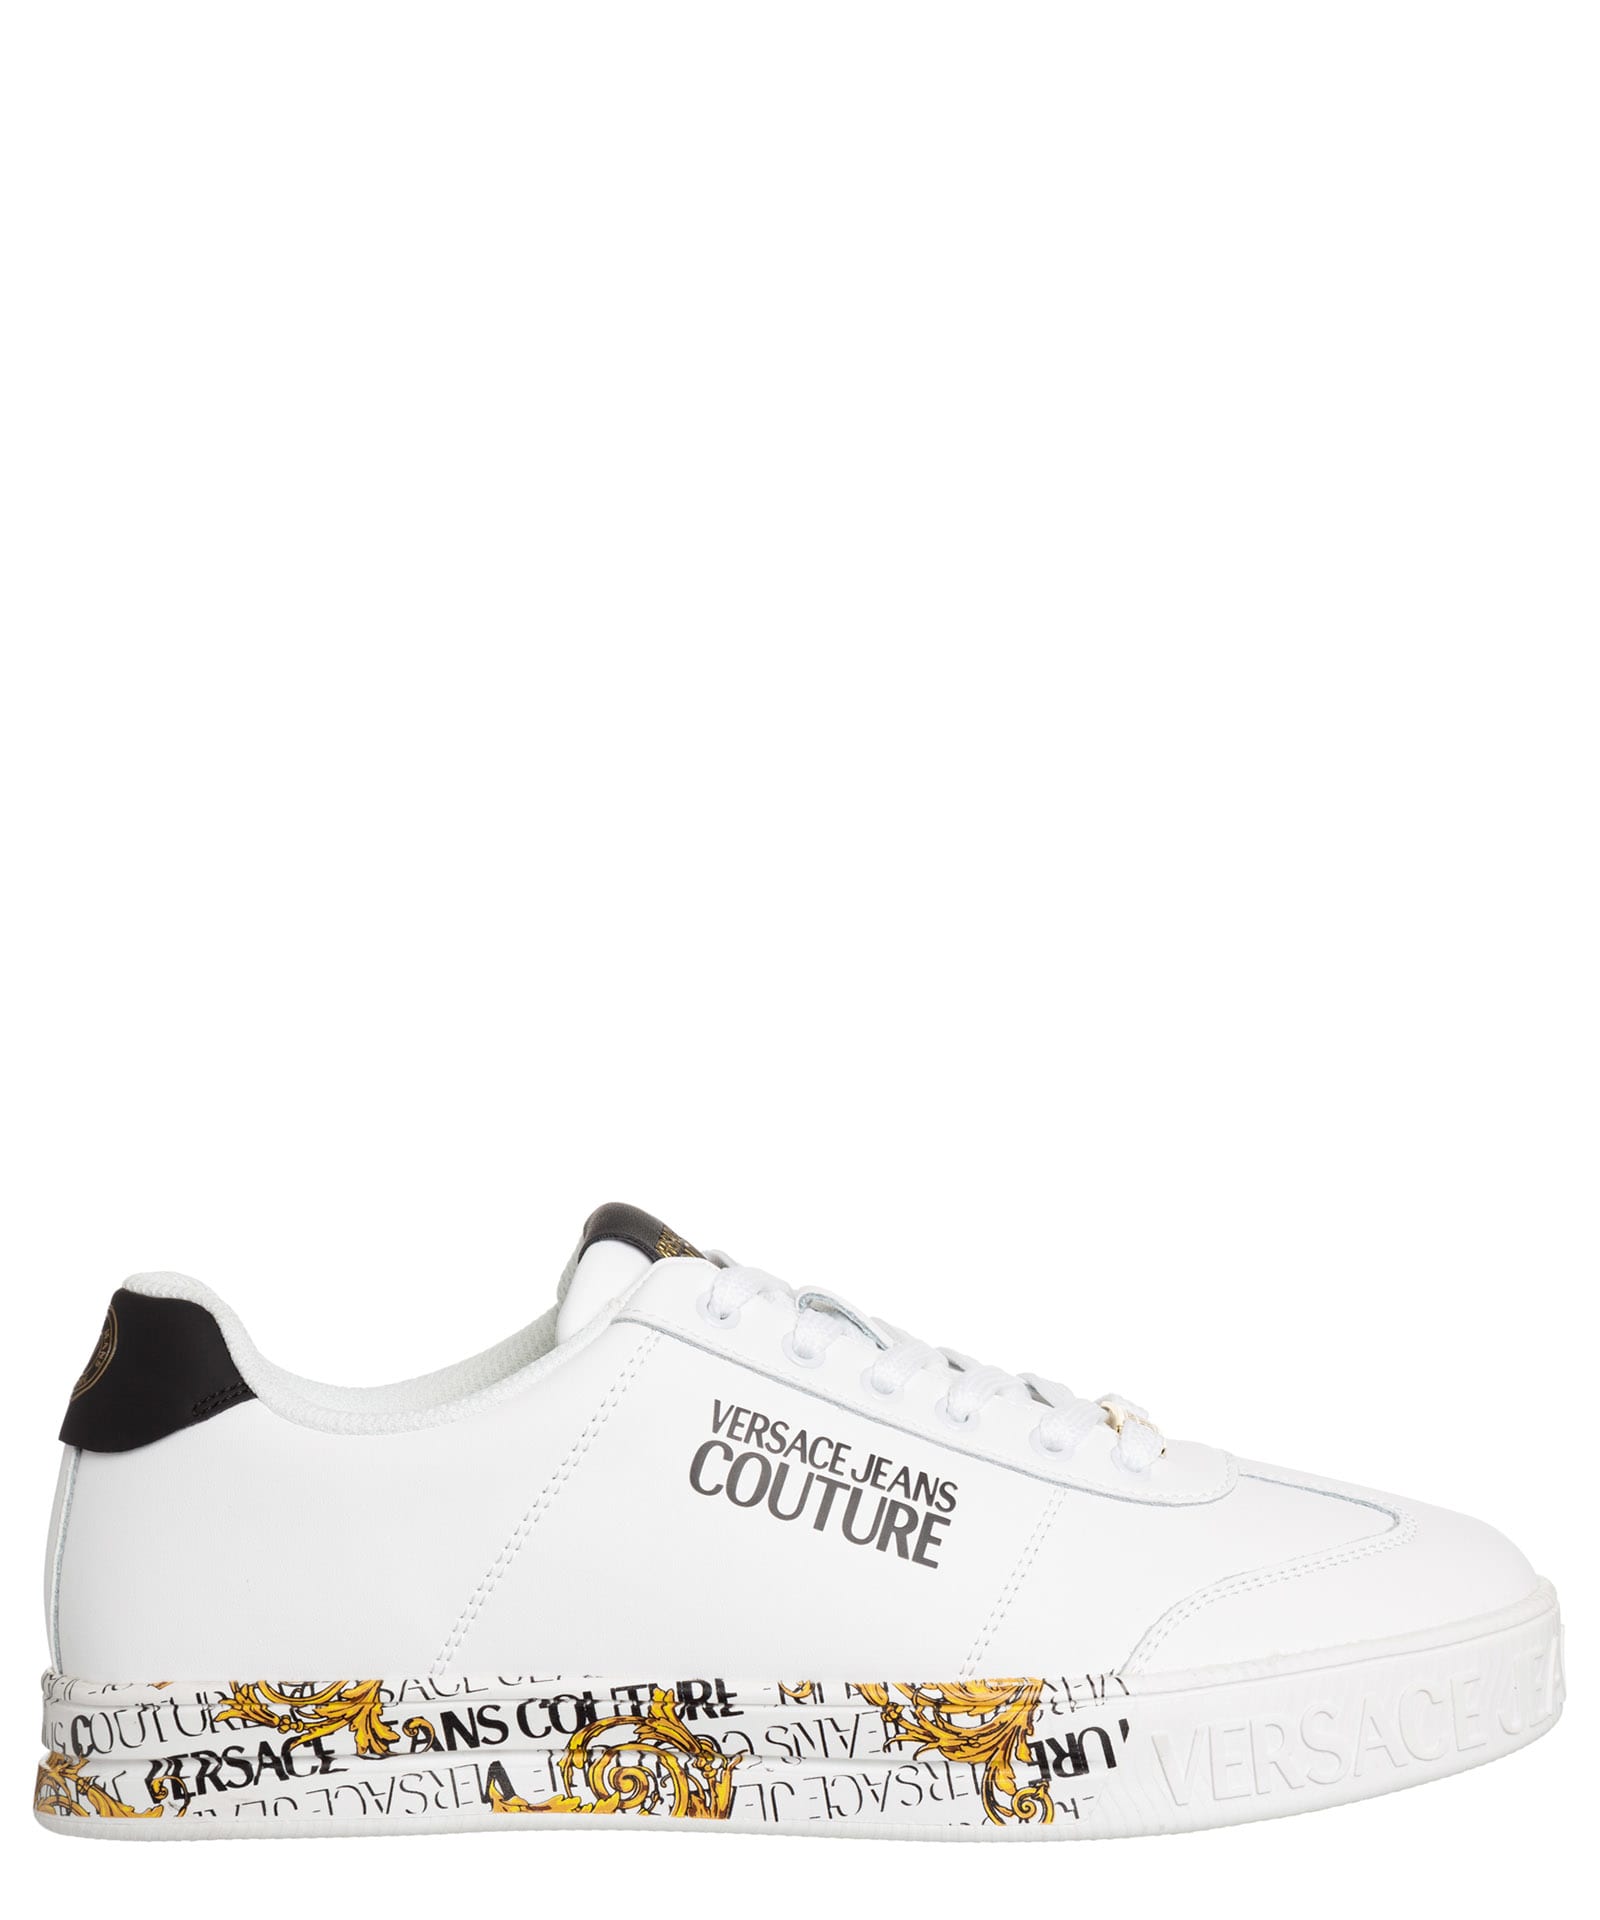 VERSACE JEANS COUTURE COURT 88 LOGO COUTURE LEATHER SNEAKERS